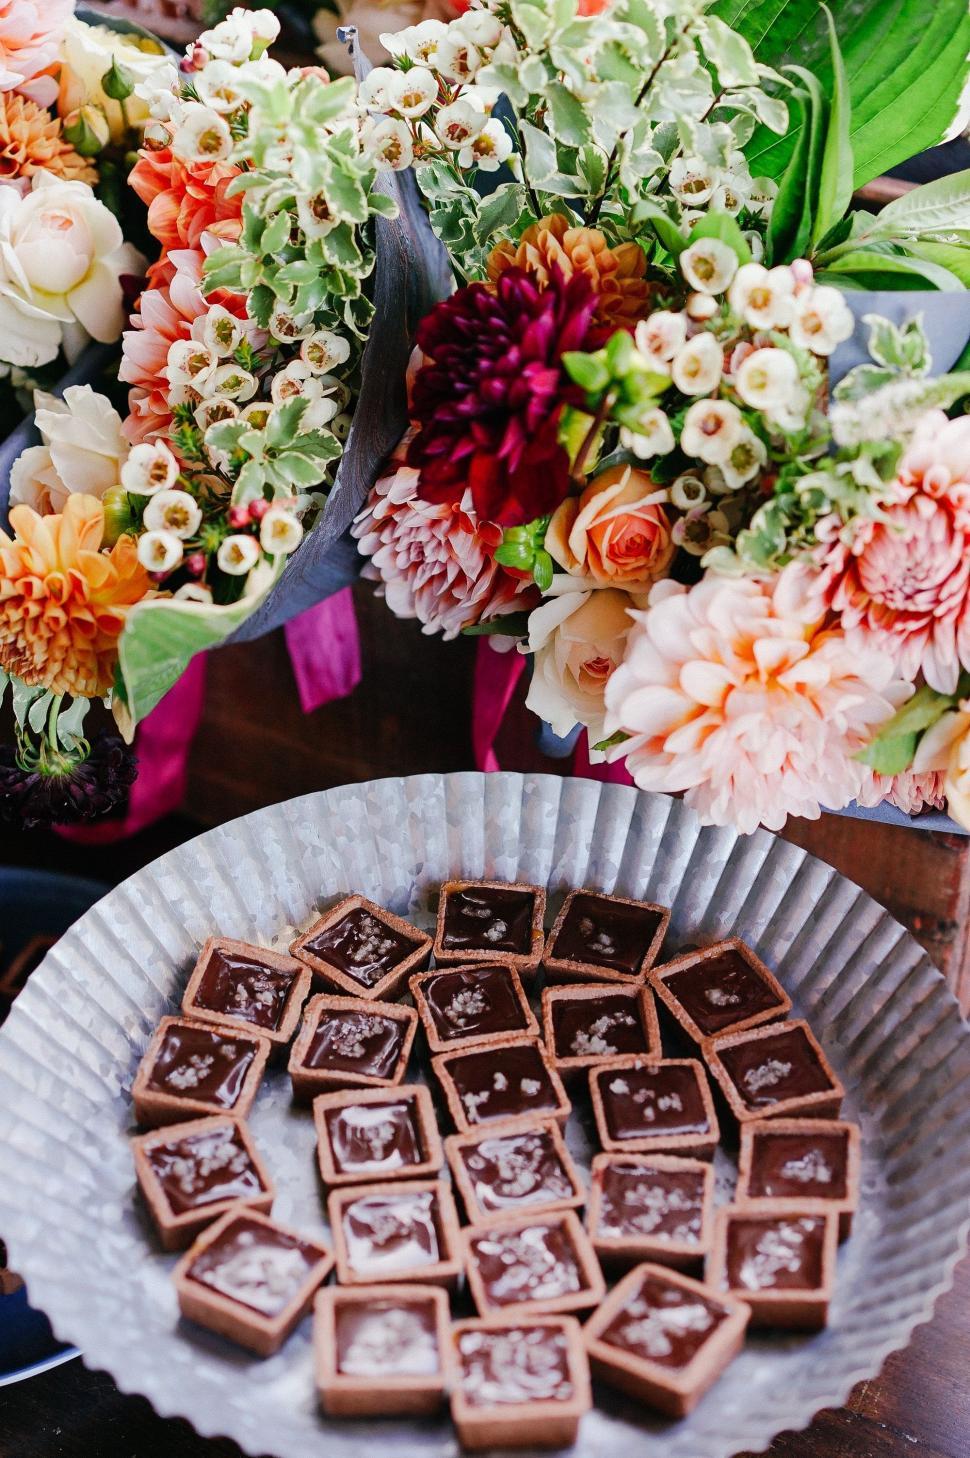 Free Image of Table Set With Chocolates and Flowers 